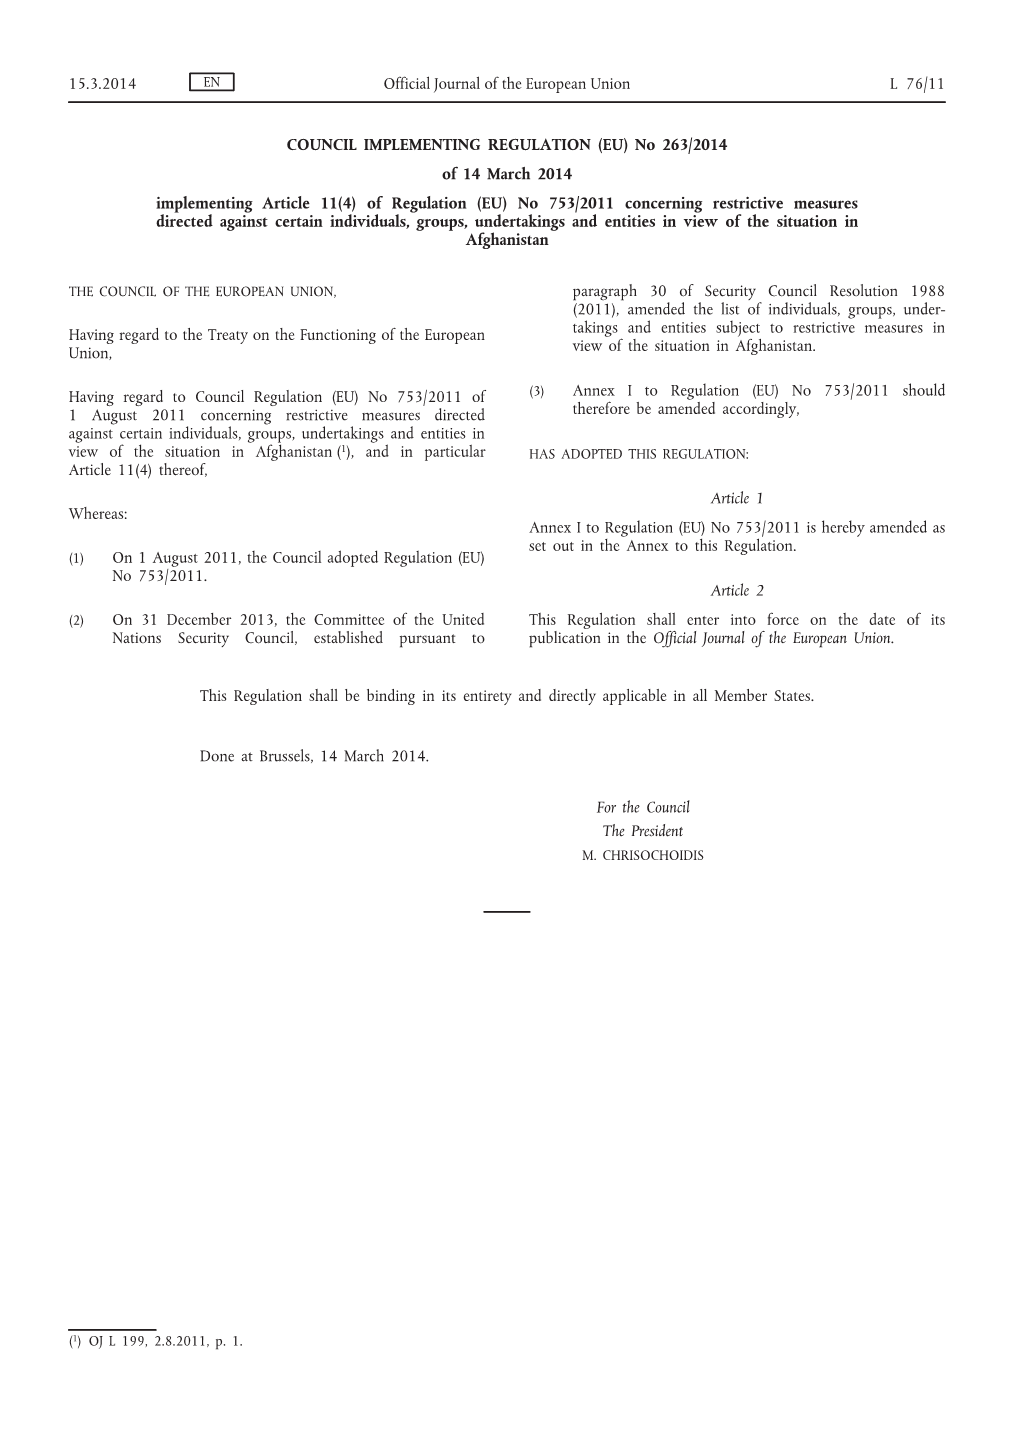 No 263/2014 of 14 March 2014 Implementing Article 11(4)